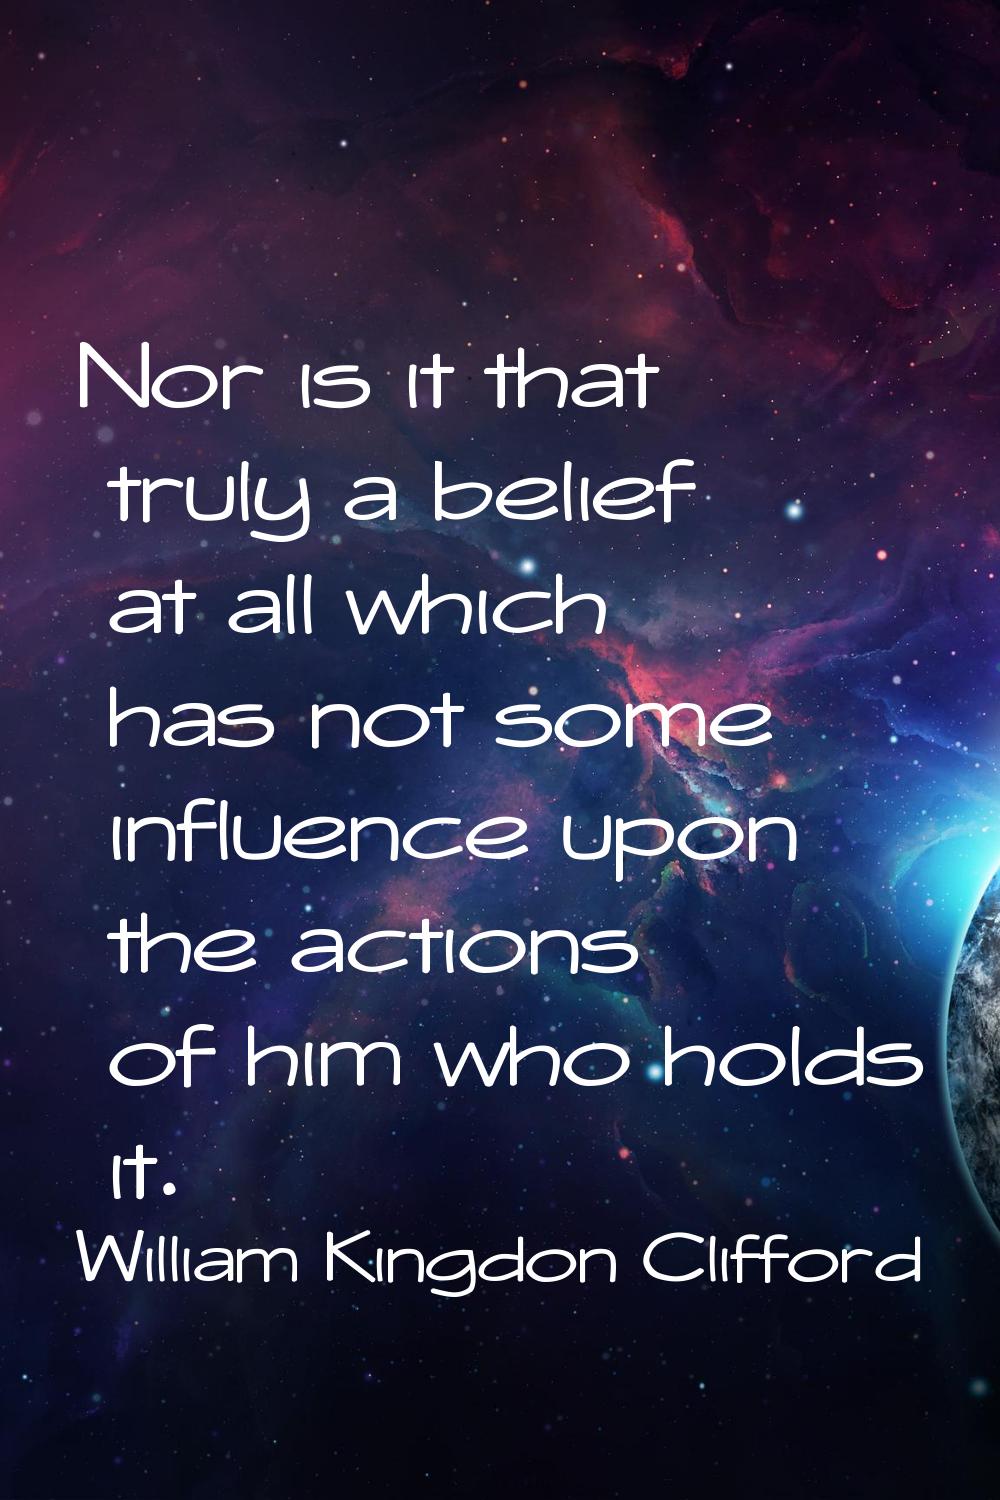 Nor is it that truly a belief at all which has not some influence upon the actions of him who holds